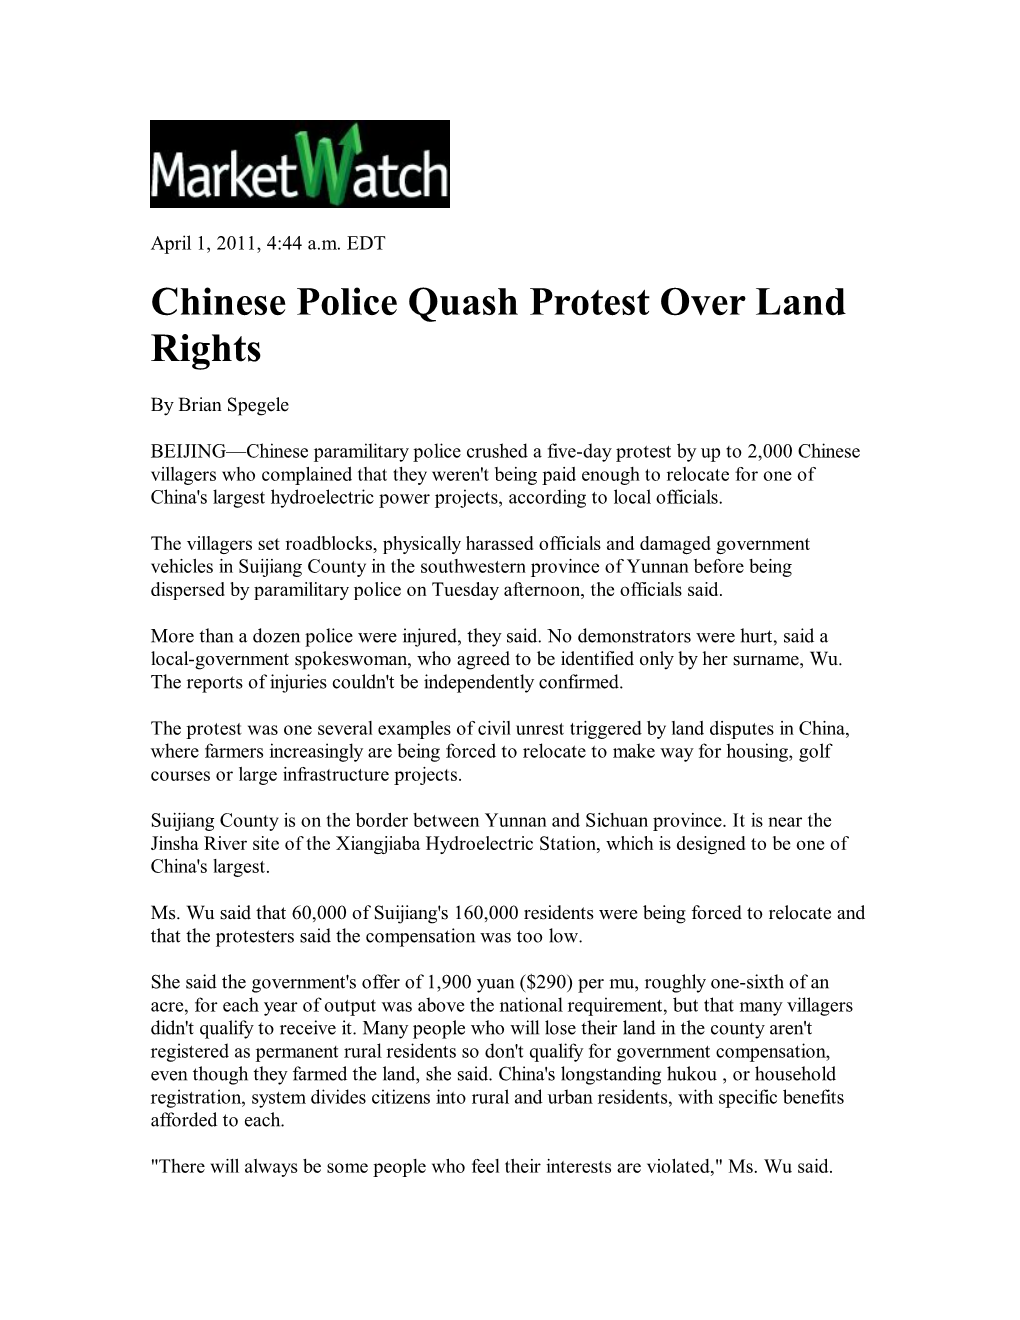 Chinese Police Quash Protest Over Land Rights